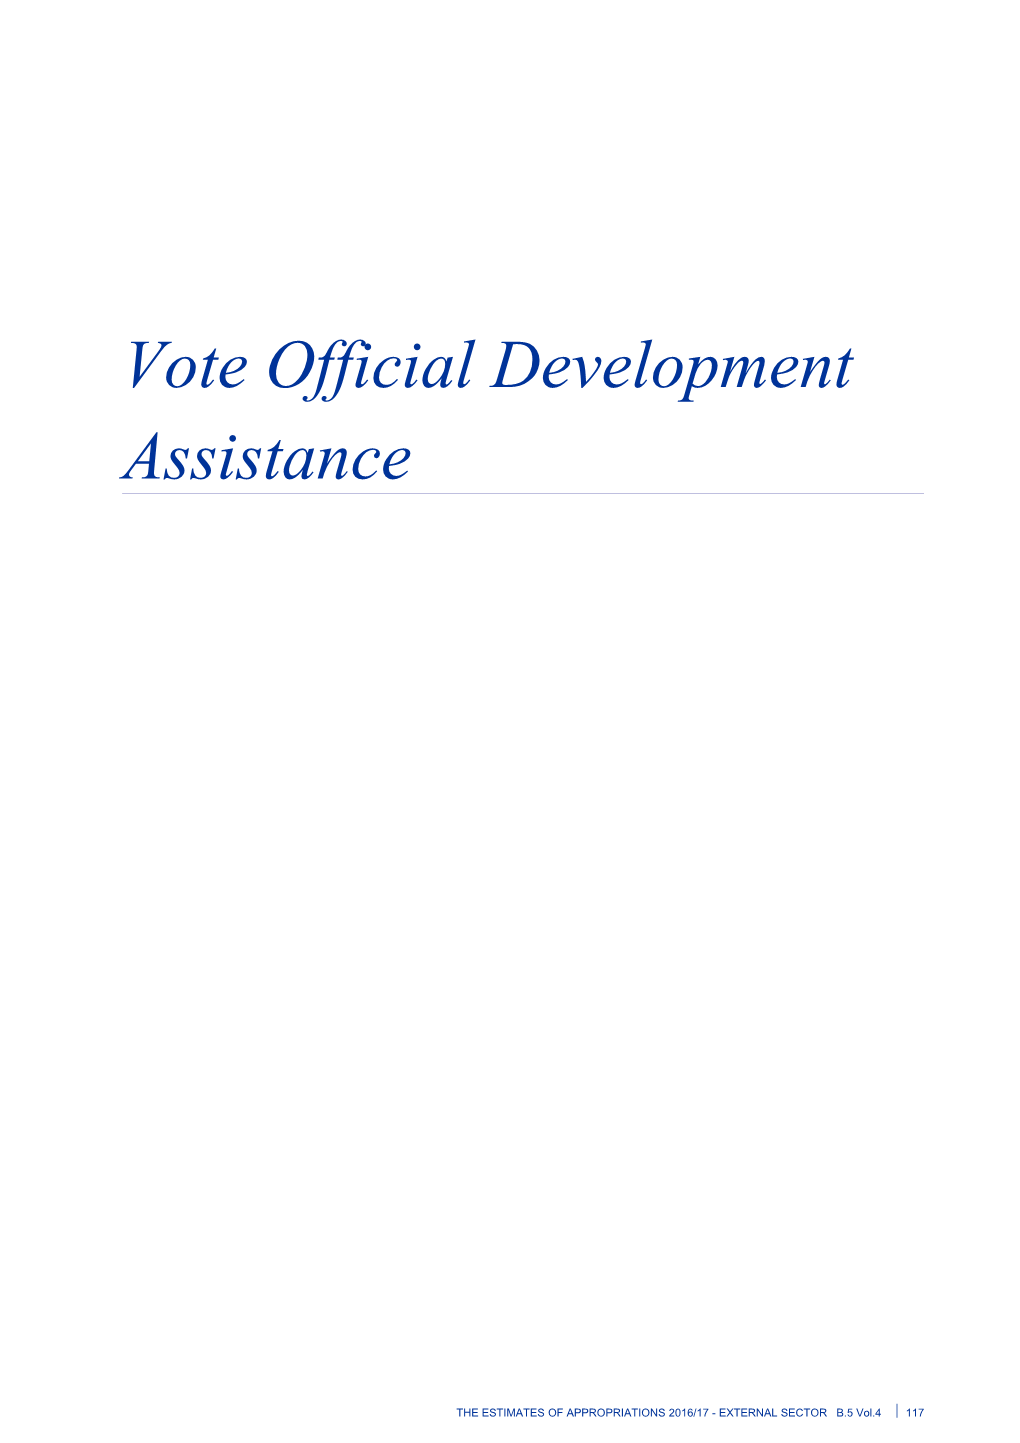 Vote Official Development Assistance - Vol 4 External Sector - the Estimates of Appropriations